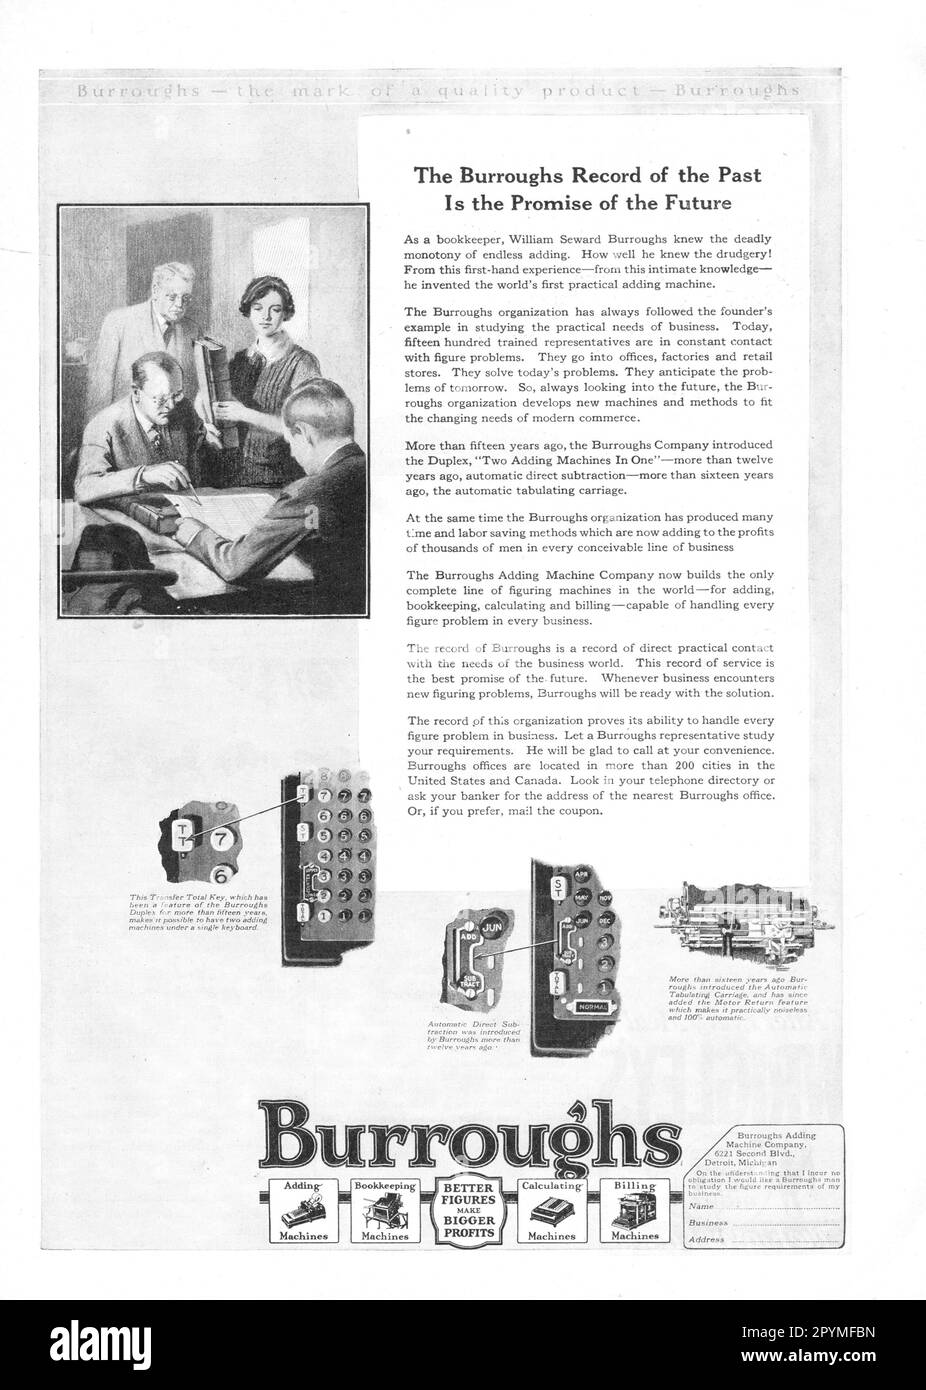 Burroughs bookkeeping machine 'Record of the past is the promise for the future' antique advertisement, poster size, A3 Stock Photo